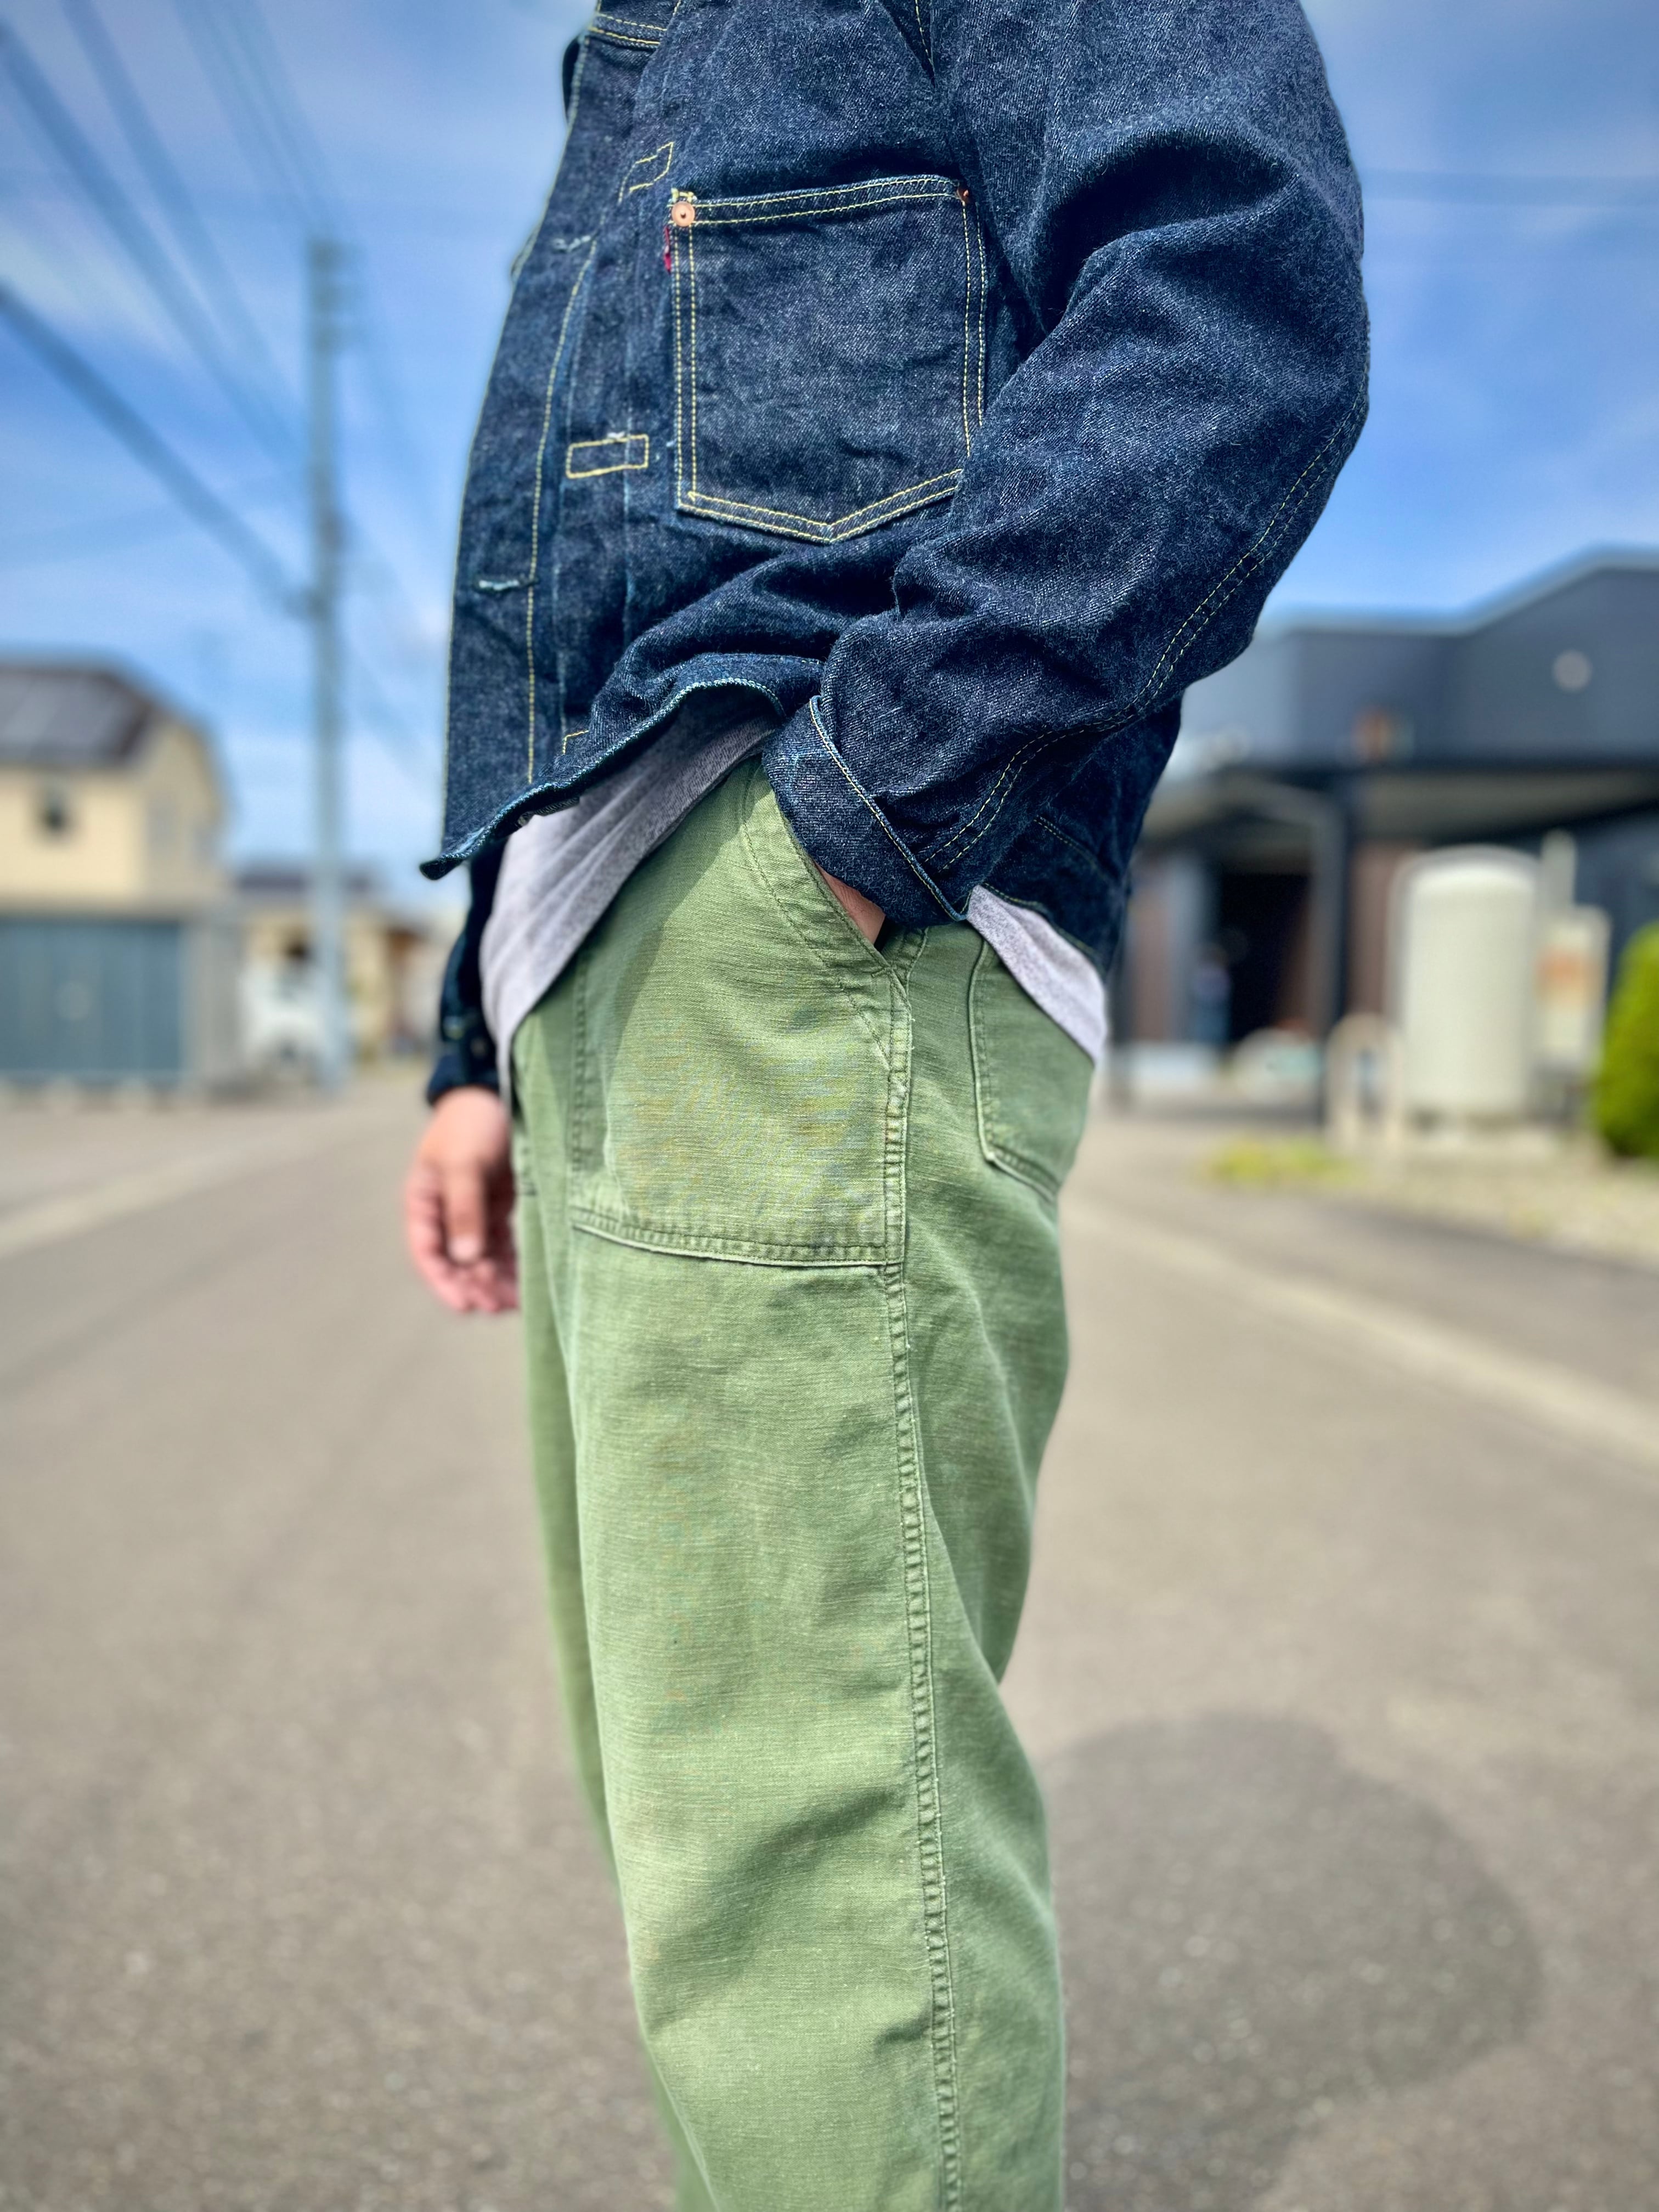 US ARMY UTILITY TROUSERS 米軍 ベイカーパンツ USA製